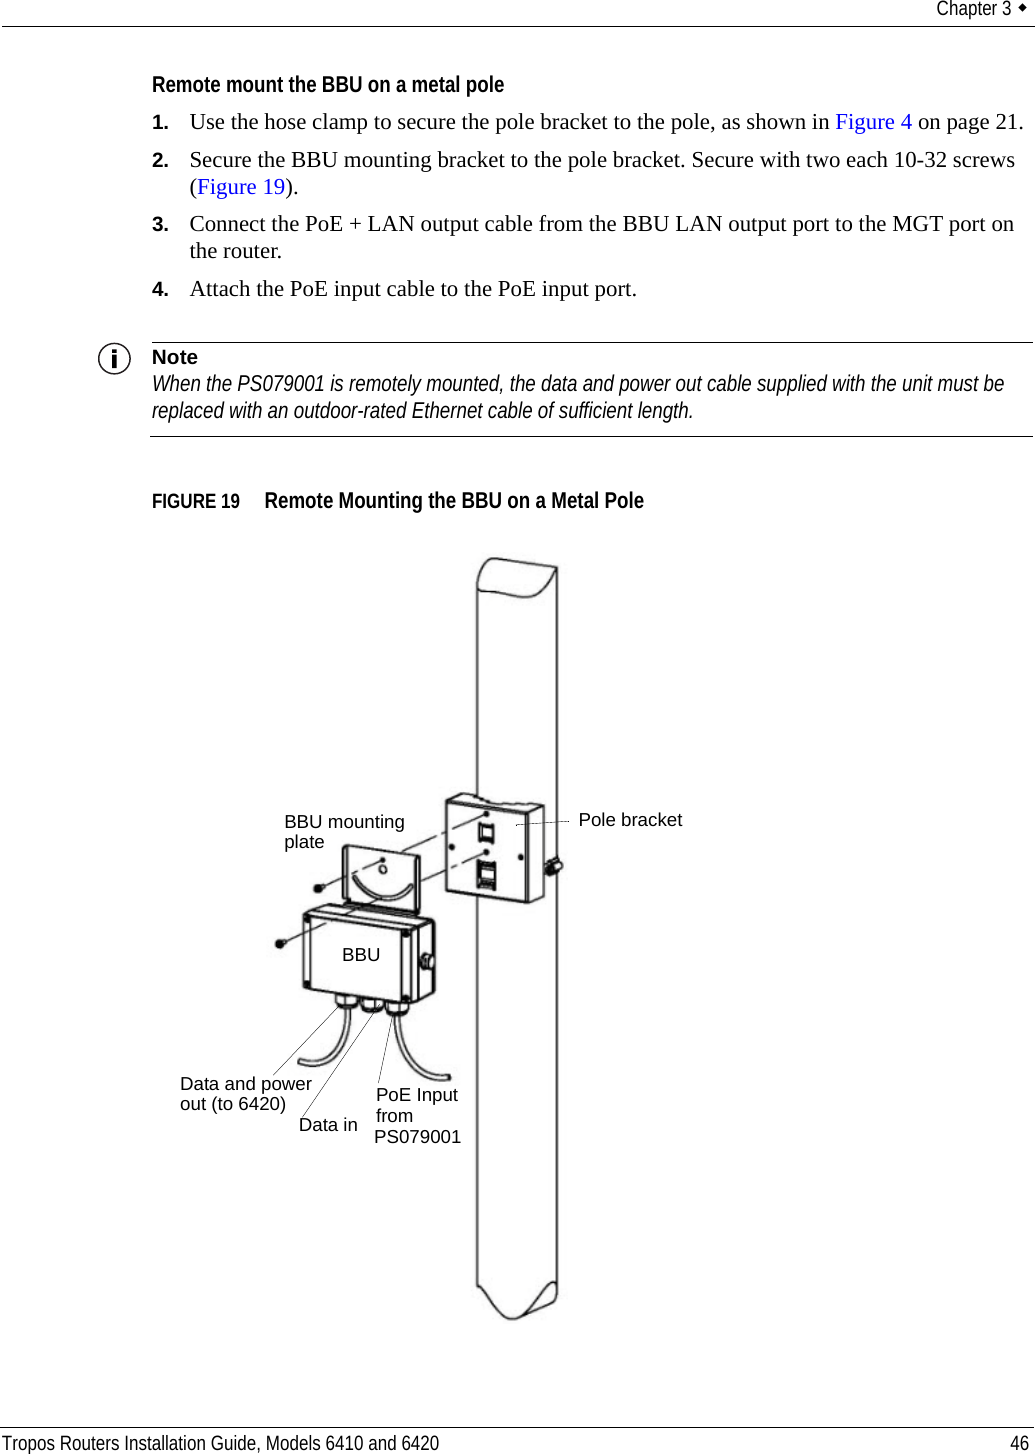 Chapter 3  Tropos Routers Installation Guide, Models 6410 and 6420 46Remote mount the BBU on a metal pole1. Use the hose clamp to secure the pole bracket to the pole, as shown in Figure 4 on page 21.2. Secure the BBU mounting bracket to the pole bracket. Secure with two each 10-32 screws (Figure 19).3. Connect the PoE + LAN output cable from the BBU LAN output port to the MGT port on the router.4. Attach the PoE input cable to the PoE input port.NoteWhen the PS079001 is remotely mounted, the data and power out cable supplied with the unit must be replaced with an outdoor-rated Ethernet cable of sufficient length.FIGURE 19   Remote Mounting the BBU on a Metal PoleBBU mountingplateBBUPoE Inputfrom Data and powerData inout (to 6420)Pole bracketPS079001